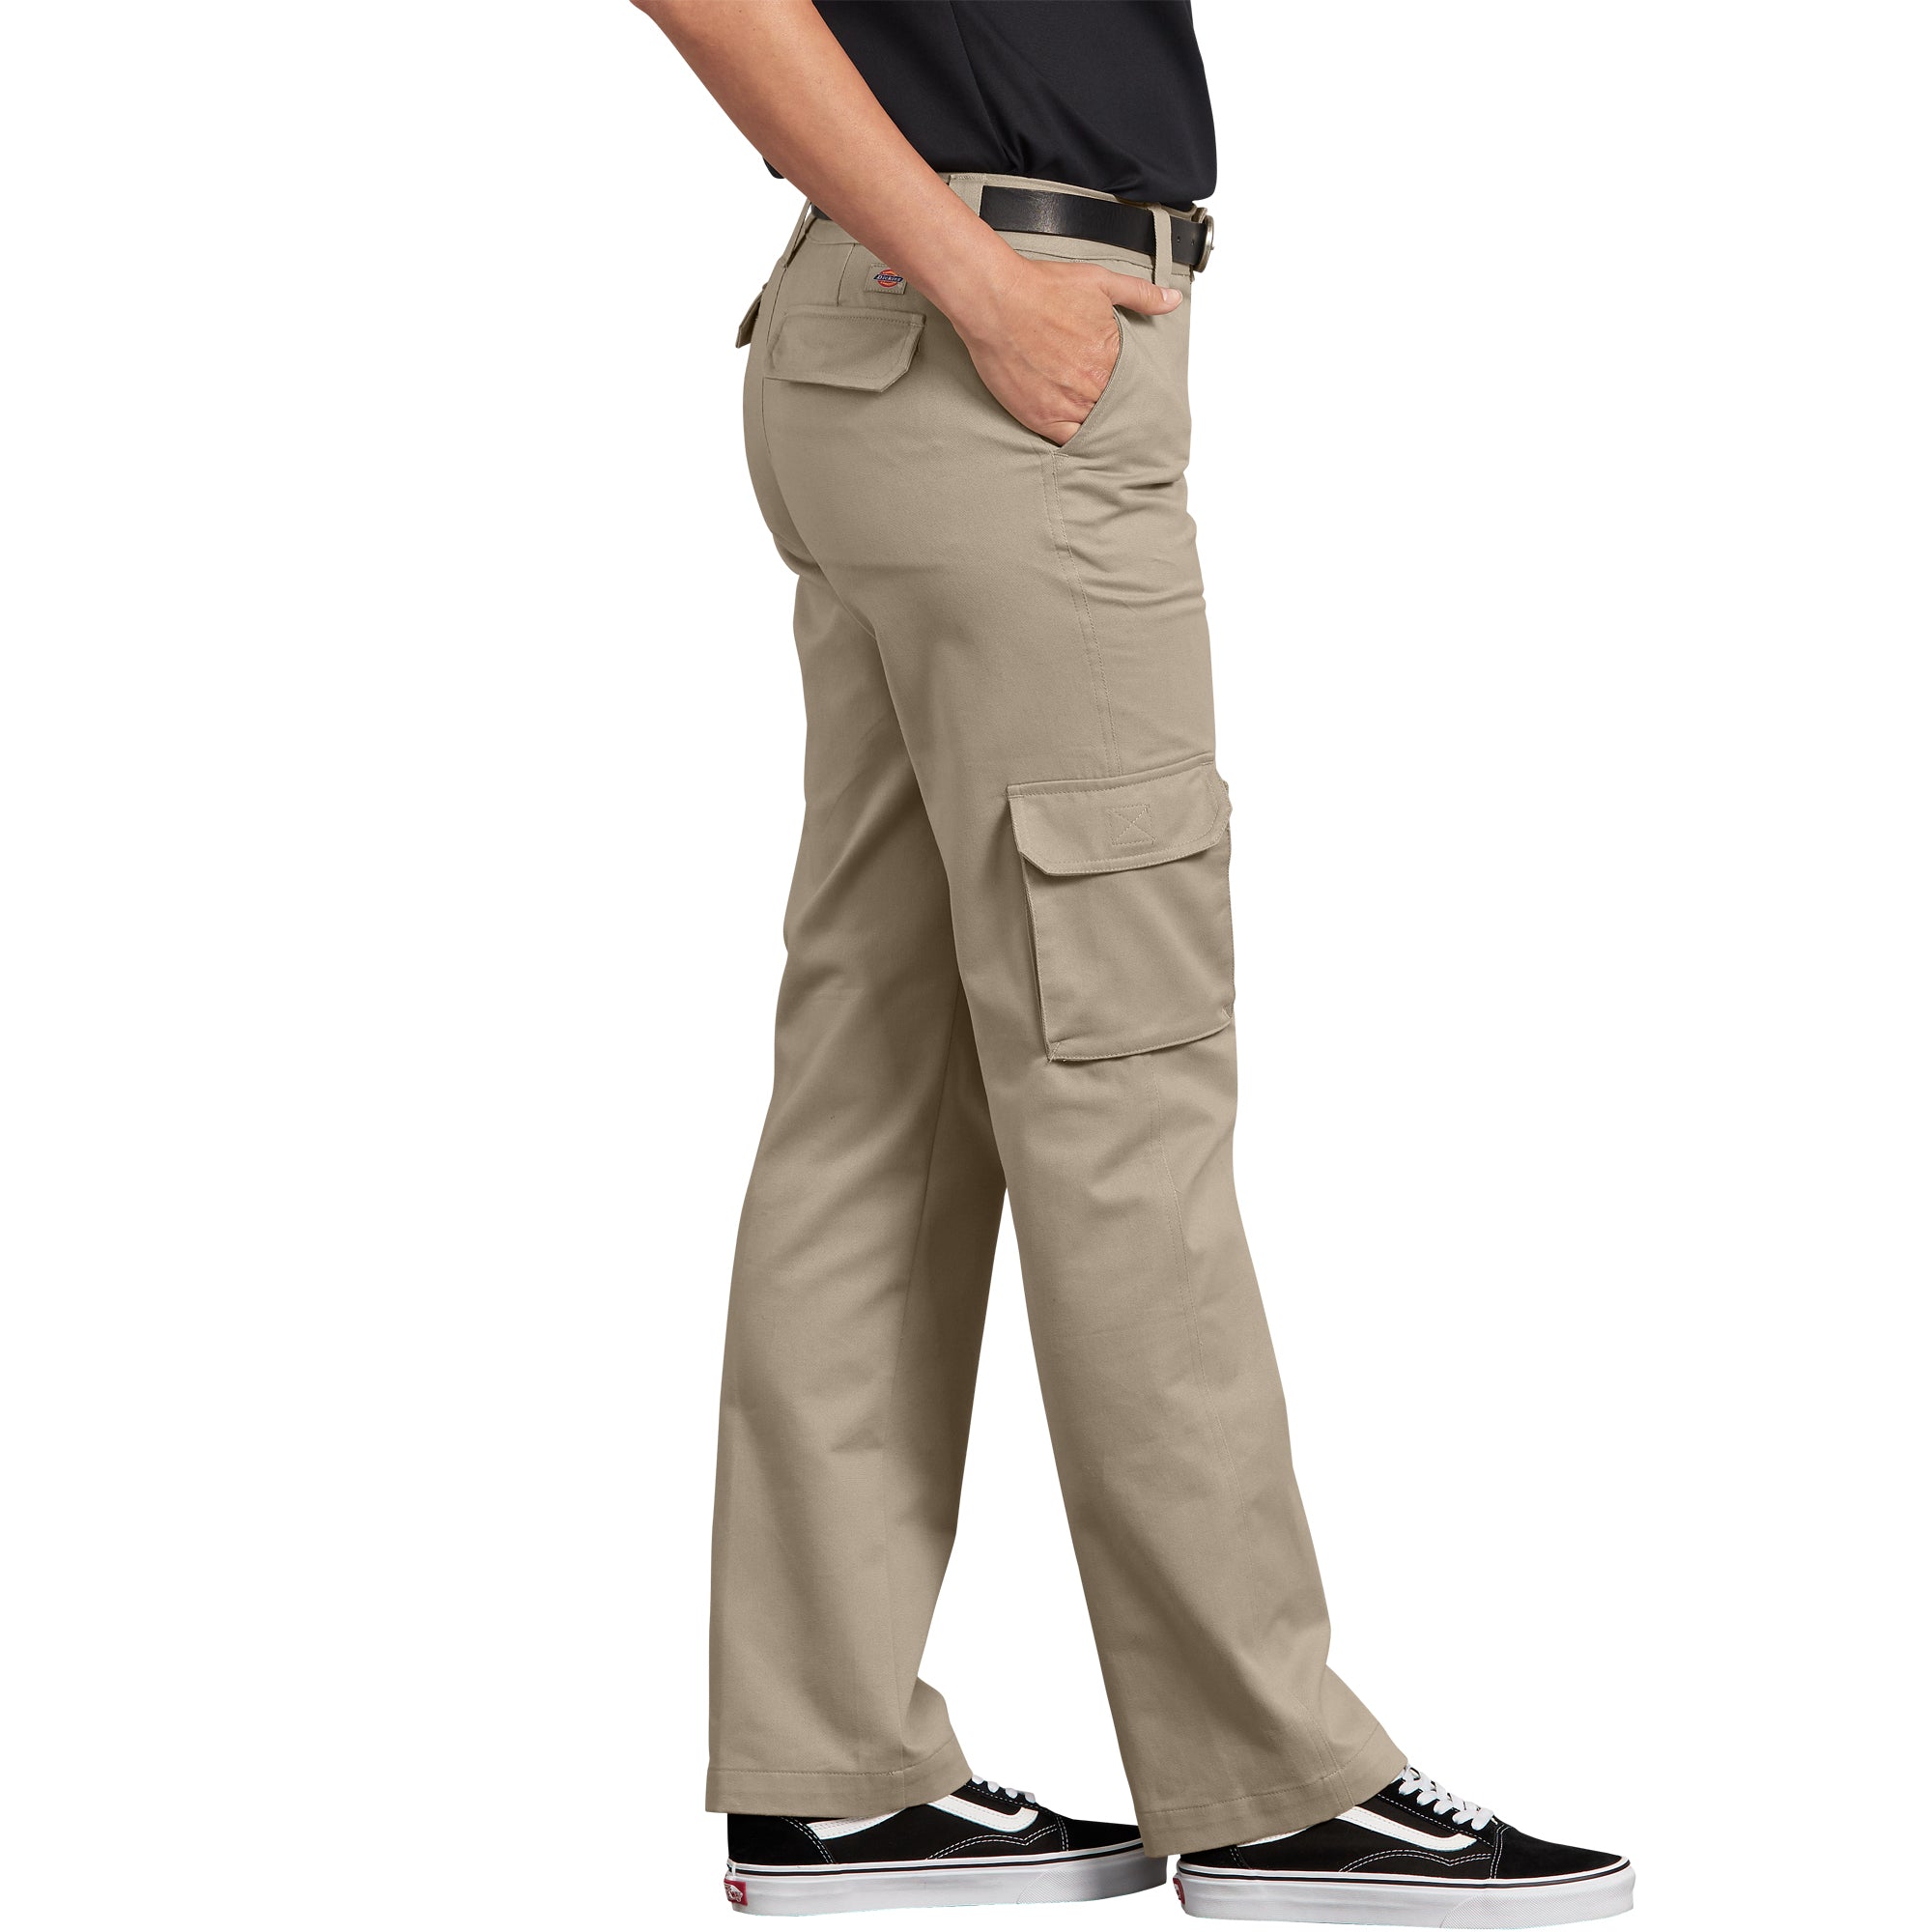 luft Fængsling niece Dickies Stretch Cargo Women's Work Pant FP888DS - Beige | Work Authority